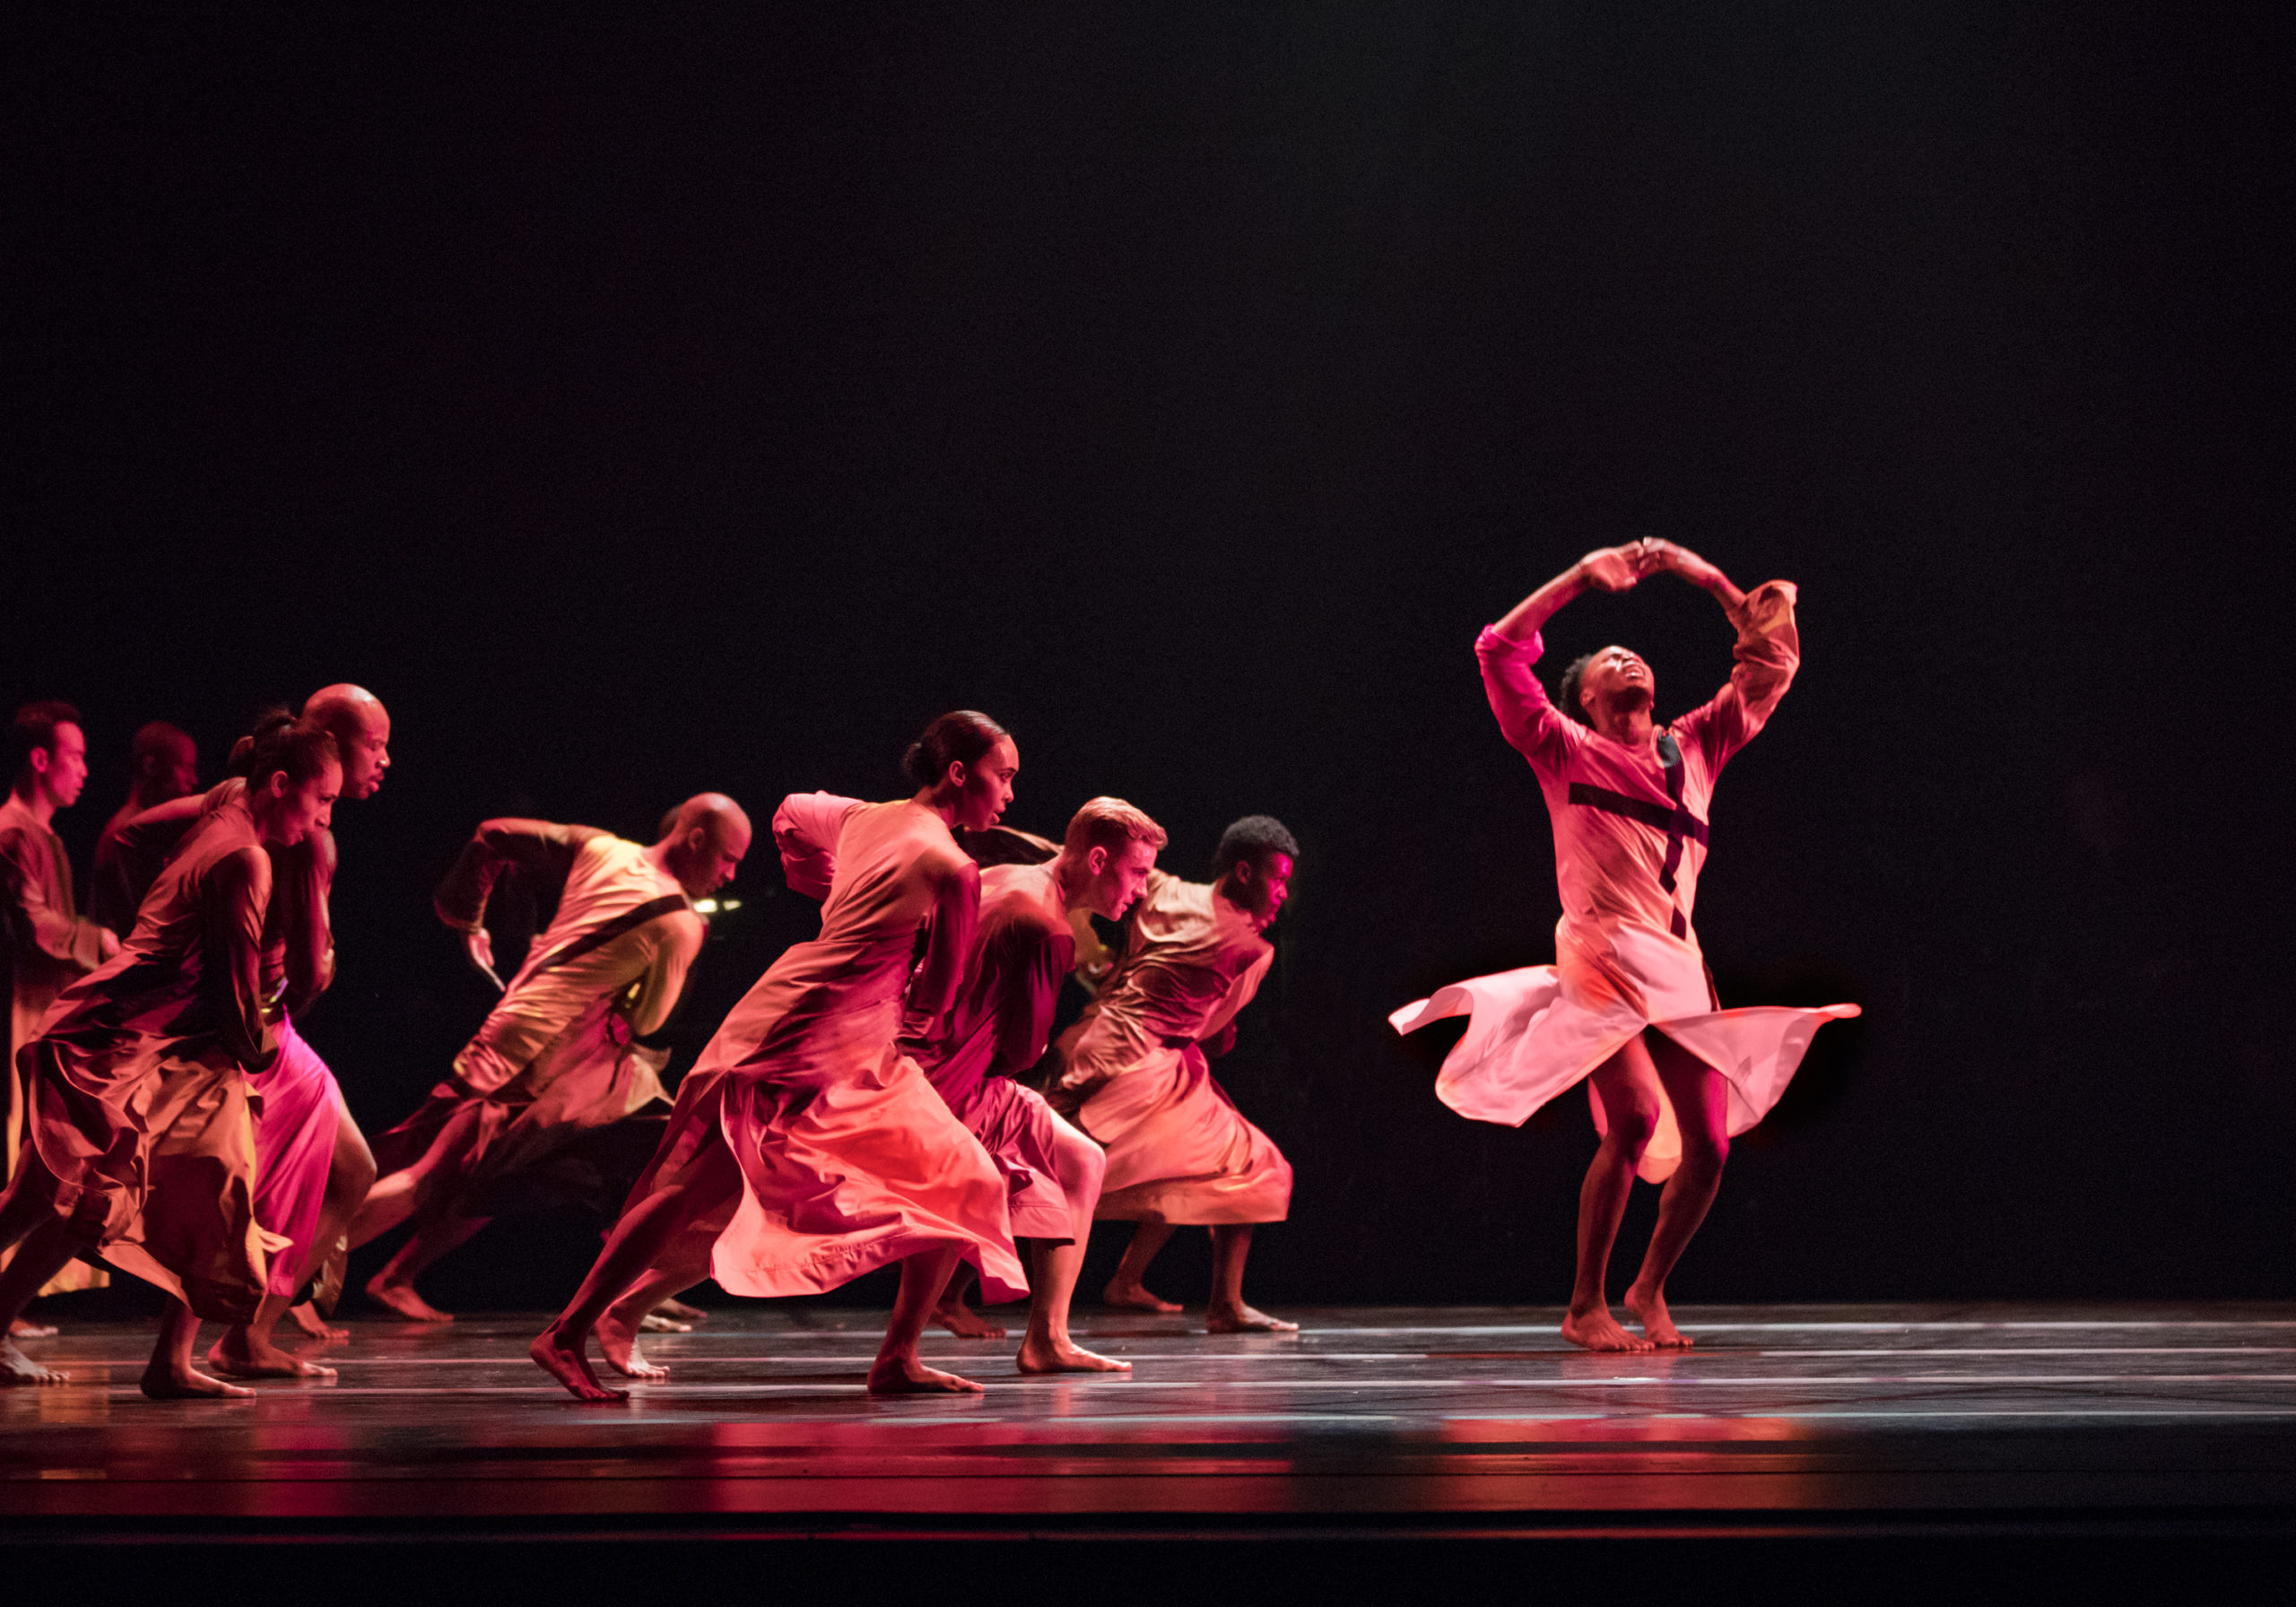 A group of dancers lean forward in a deep lunge, facing a soloist spinning with his hands above his head, looking up